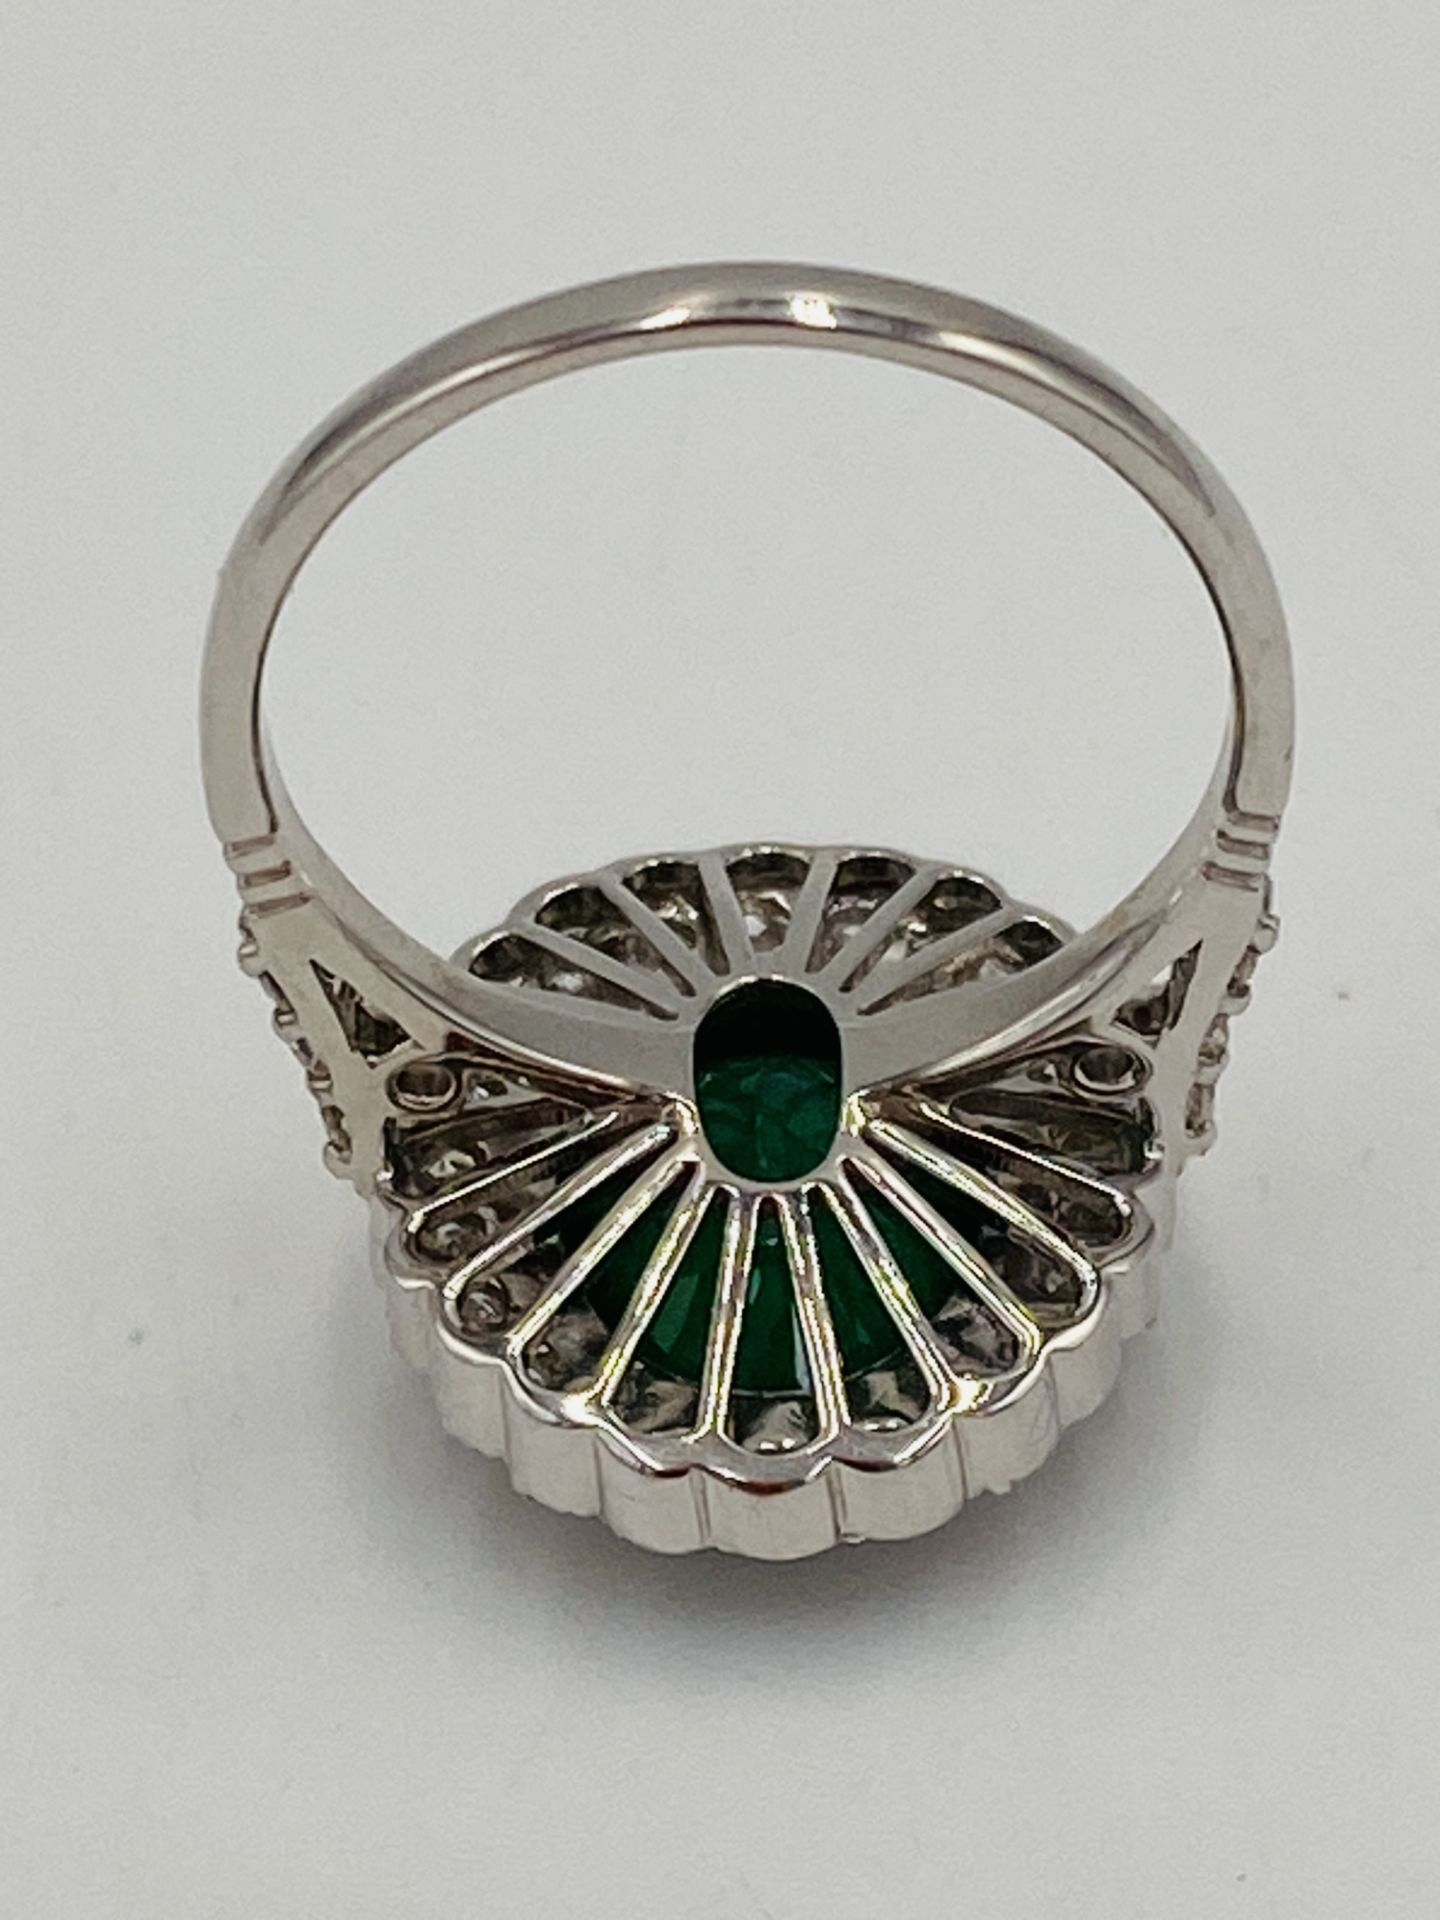 18ct white gold ring set with a oval emerald and diamond surround - Image 5 of 7